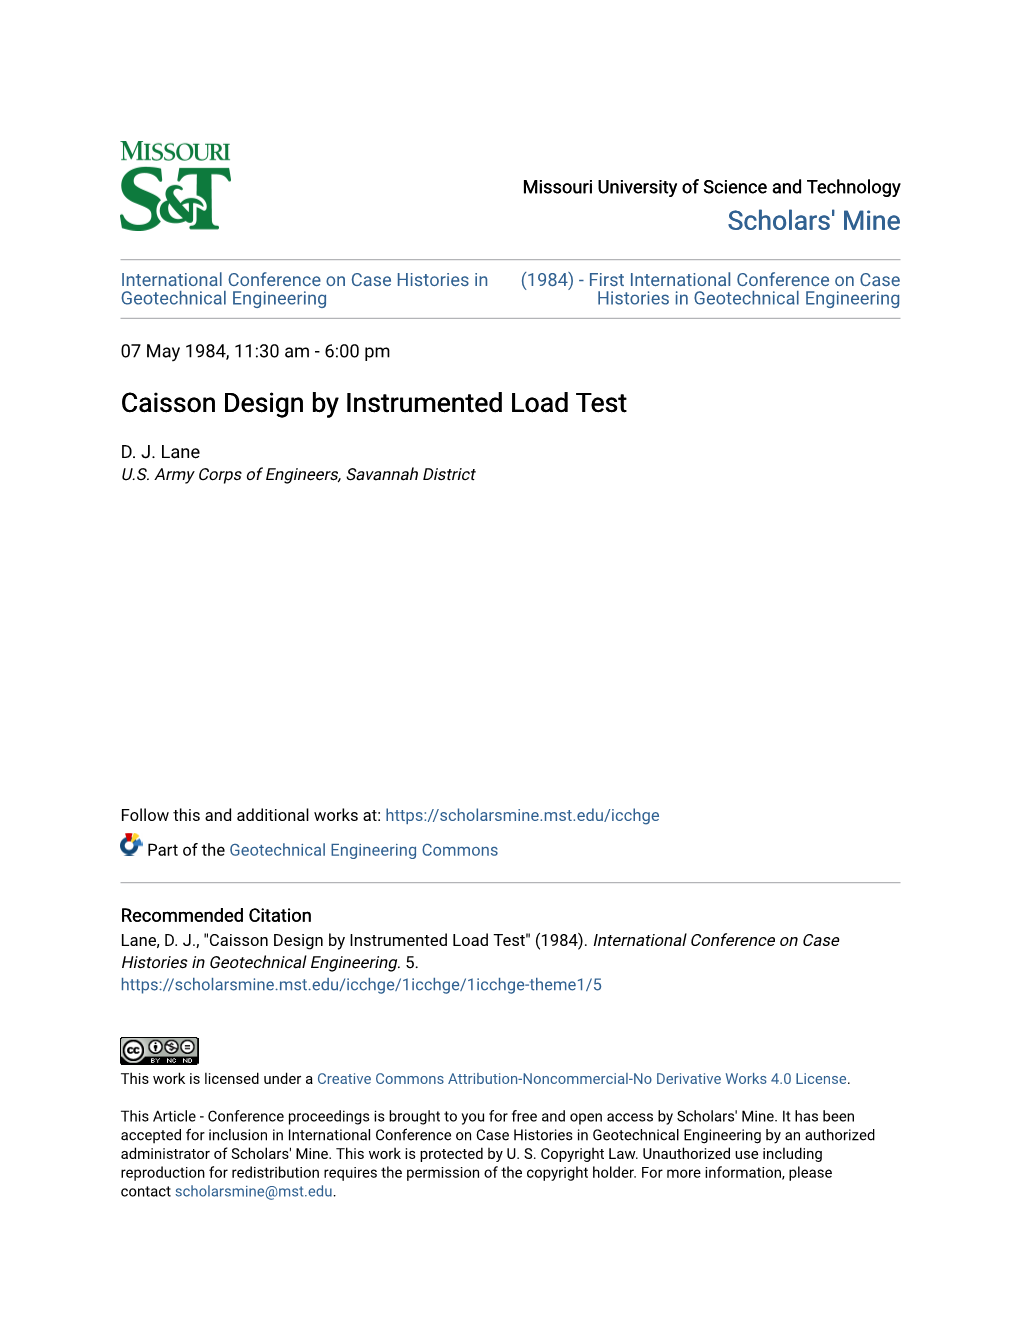 Caisson Design by Instrumented Load Test